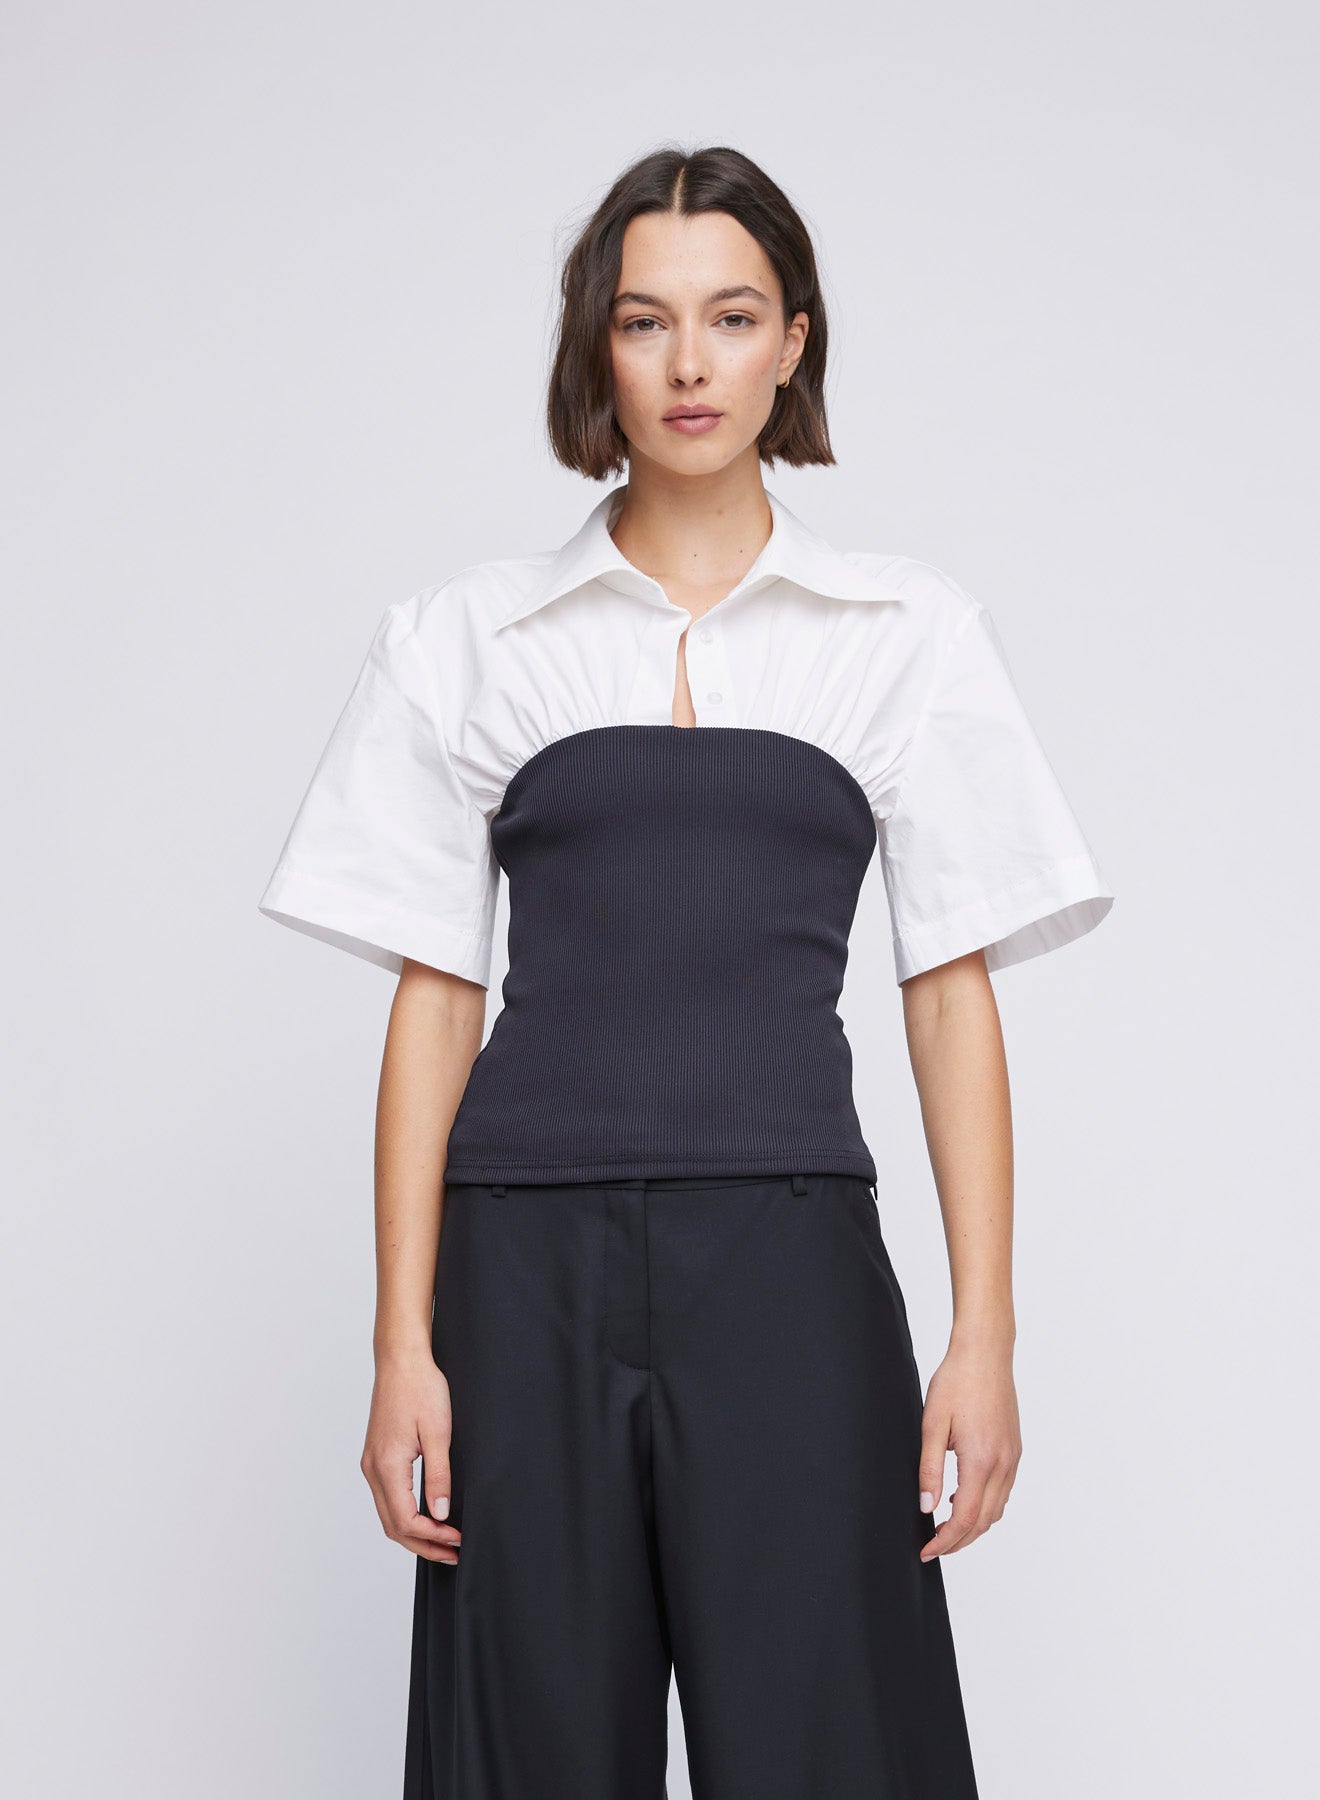 ANNA QUAN Wren Mixed Media Shirt in cotton poplin and contrast jersey ribbed knit. Shirt-style neckline, short sleeves, side zipper closure. Ideal for a classic and versatile everyday or work look.